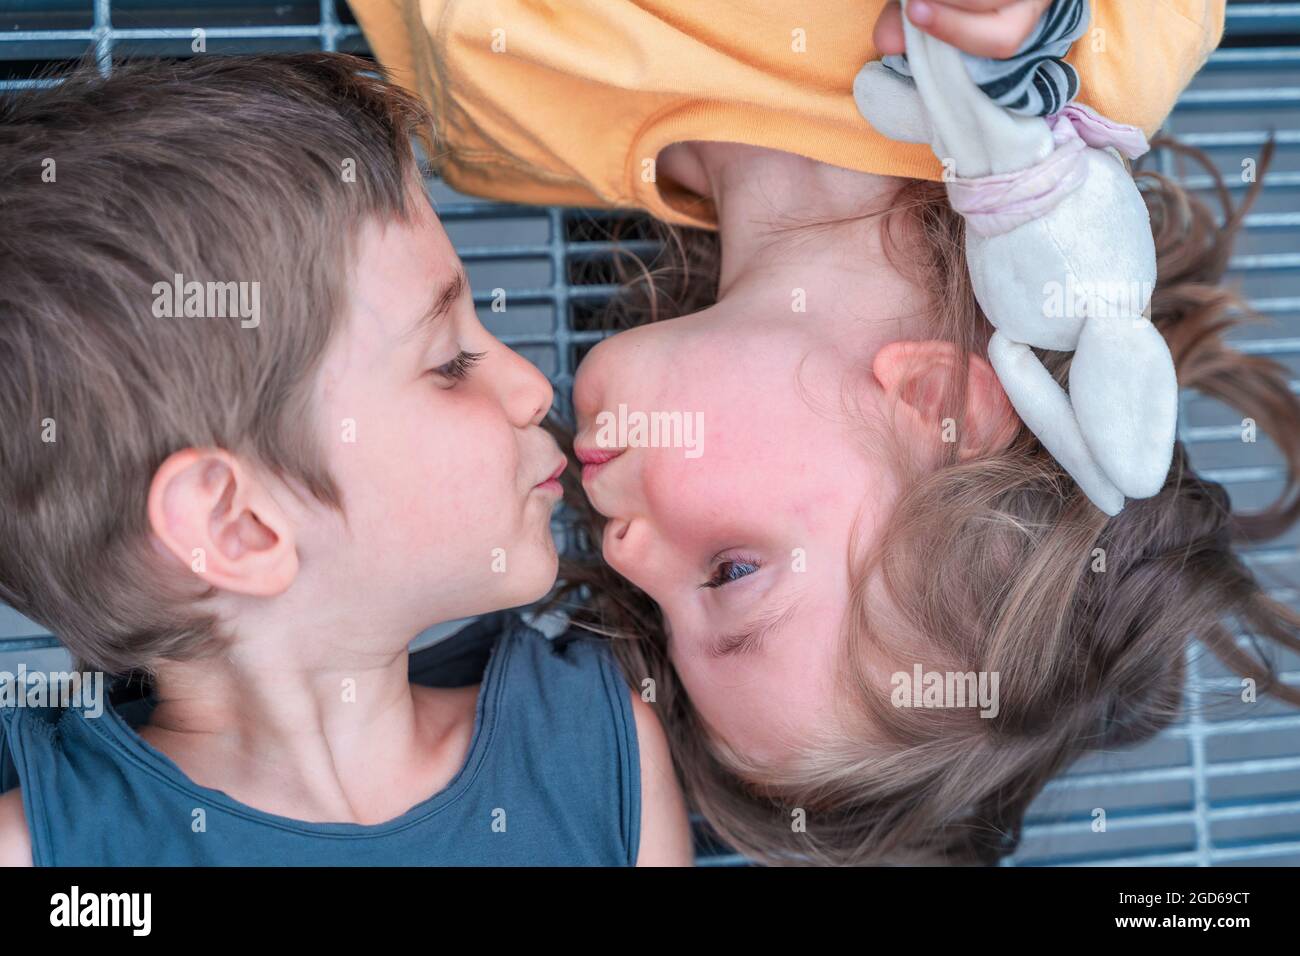 portrait of twins boys and girls are kissing lying on a metal grate Stock Photo